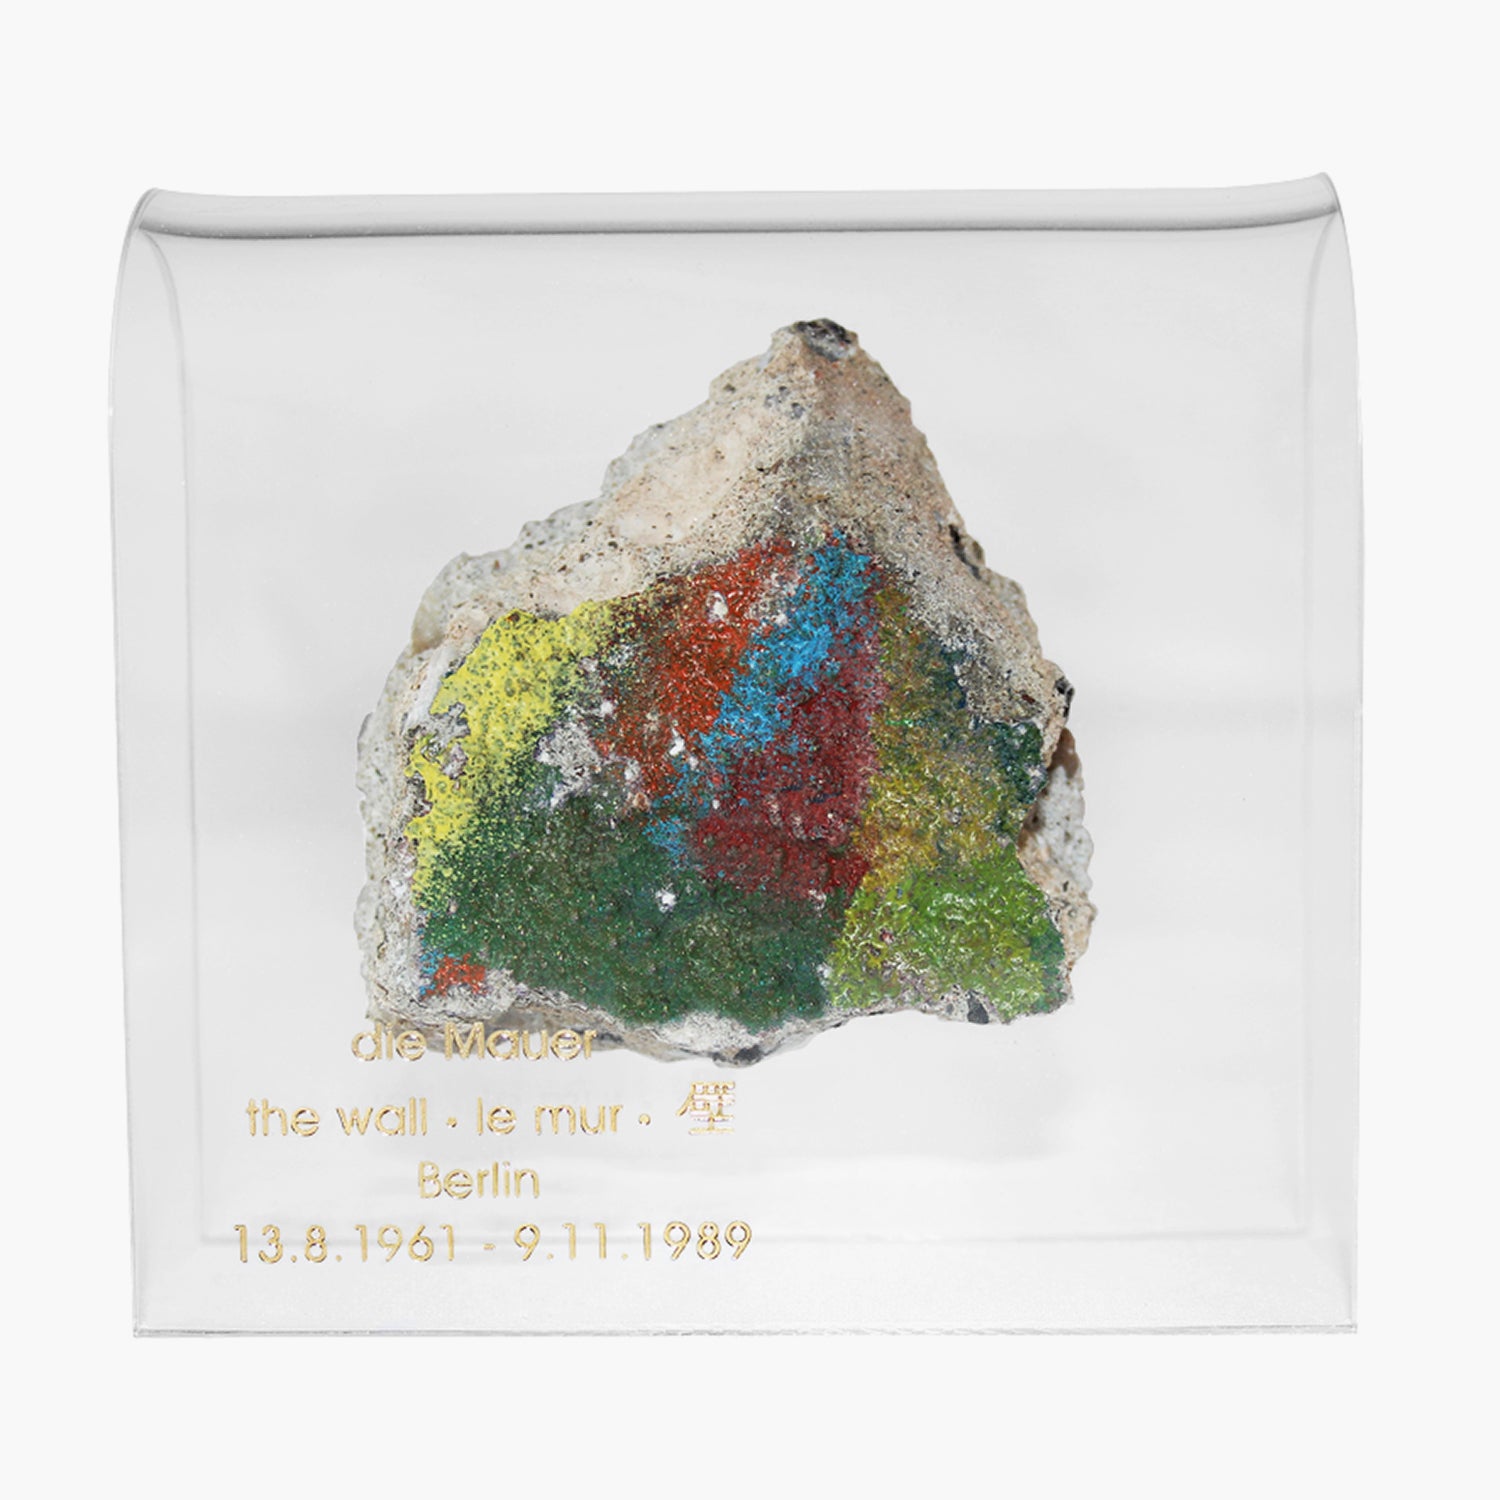 A Piece of the Berlin Wall in an acrylic Display - Size L